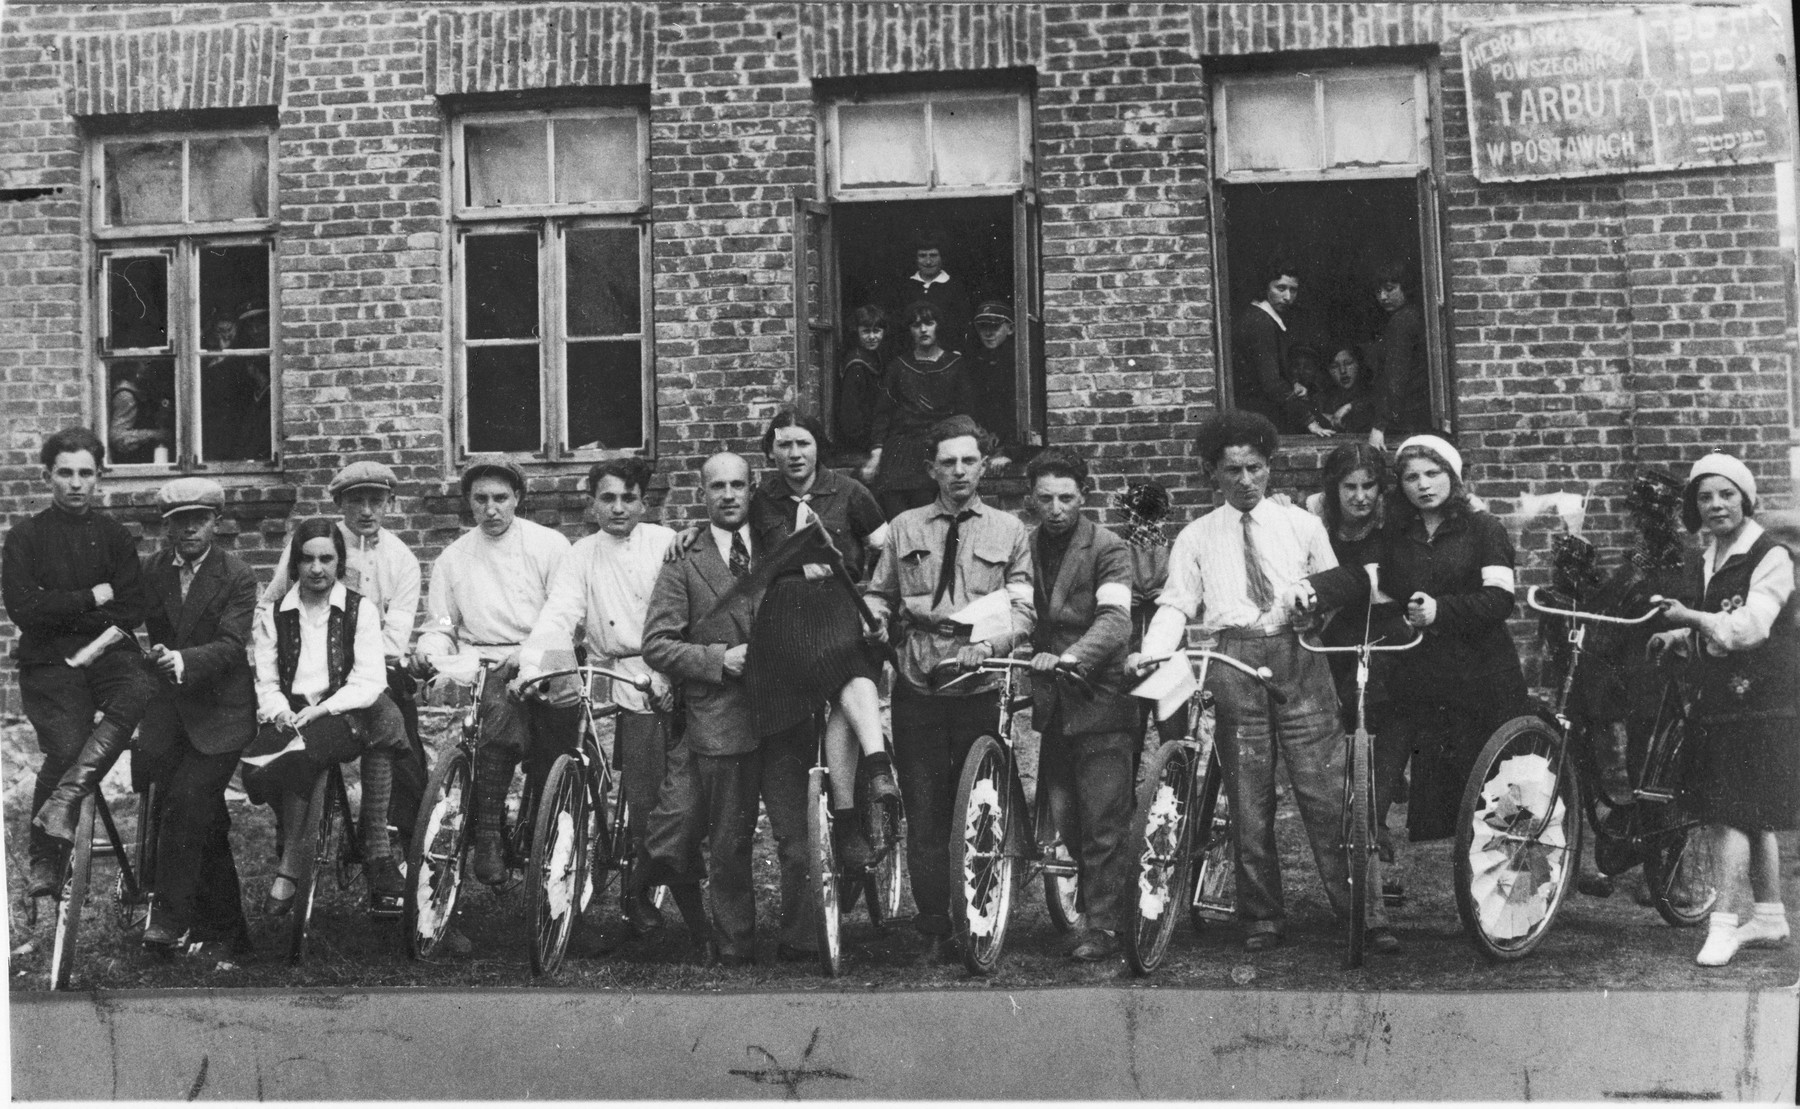 Group portrait of students and teachers at the Hebrew language Tarbut school in Postawy with their bicycles.  

Among those pictured is Ralph Denishevsky (seventh from the left).